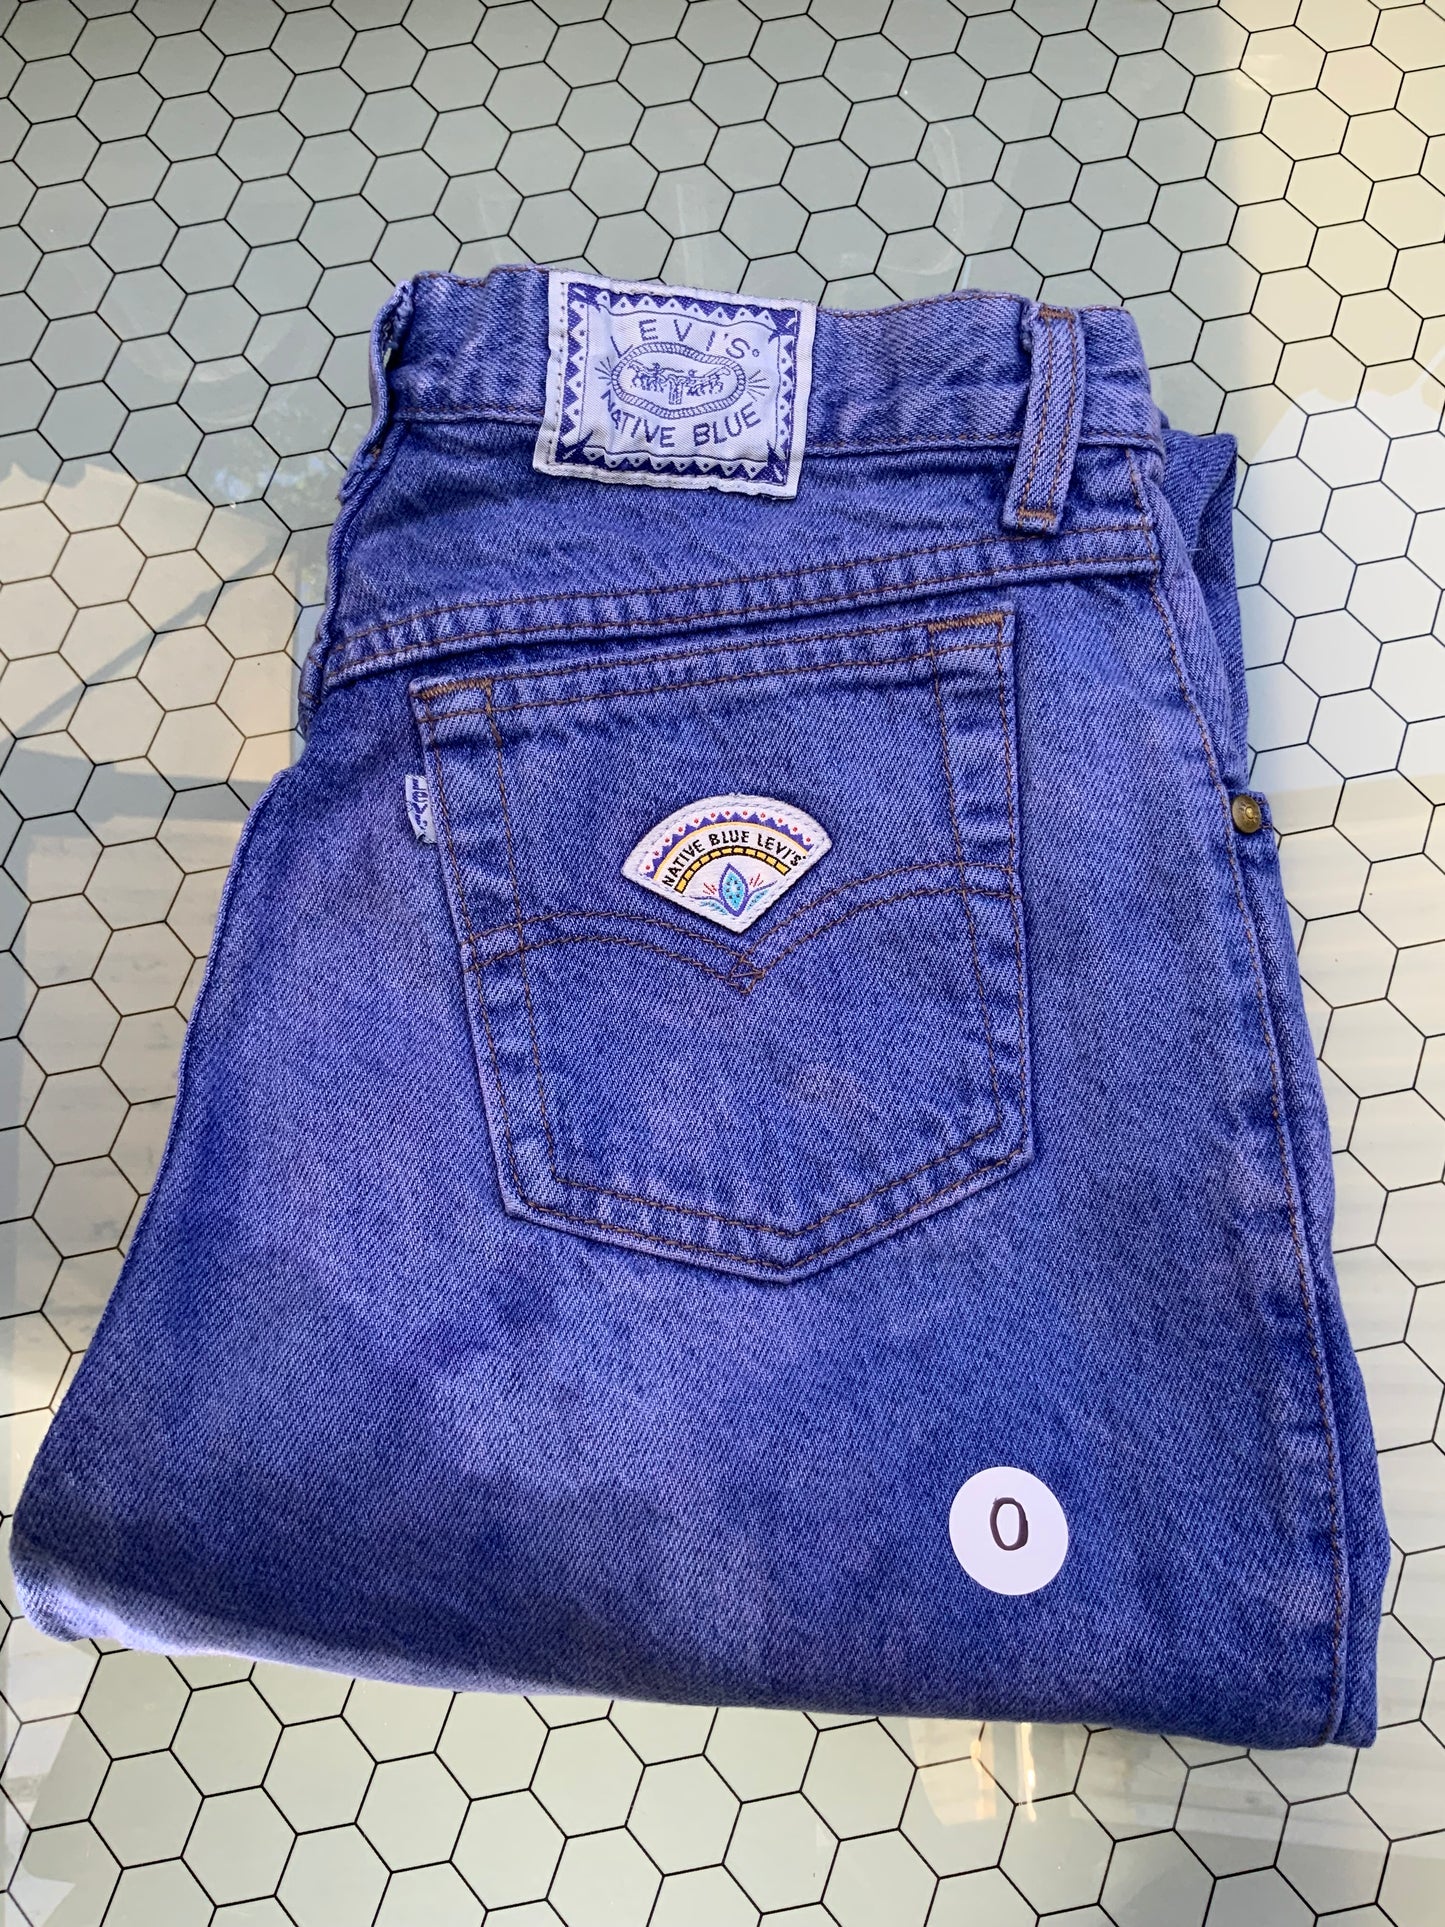 Lilac Dyed Levi’s Denim - ‘native blue’ special edition 28x30 - size 0